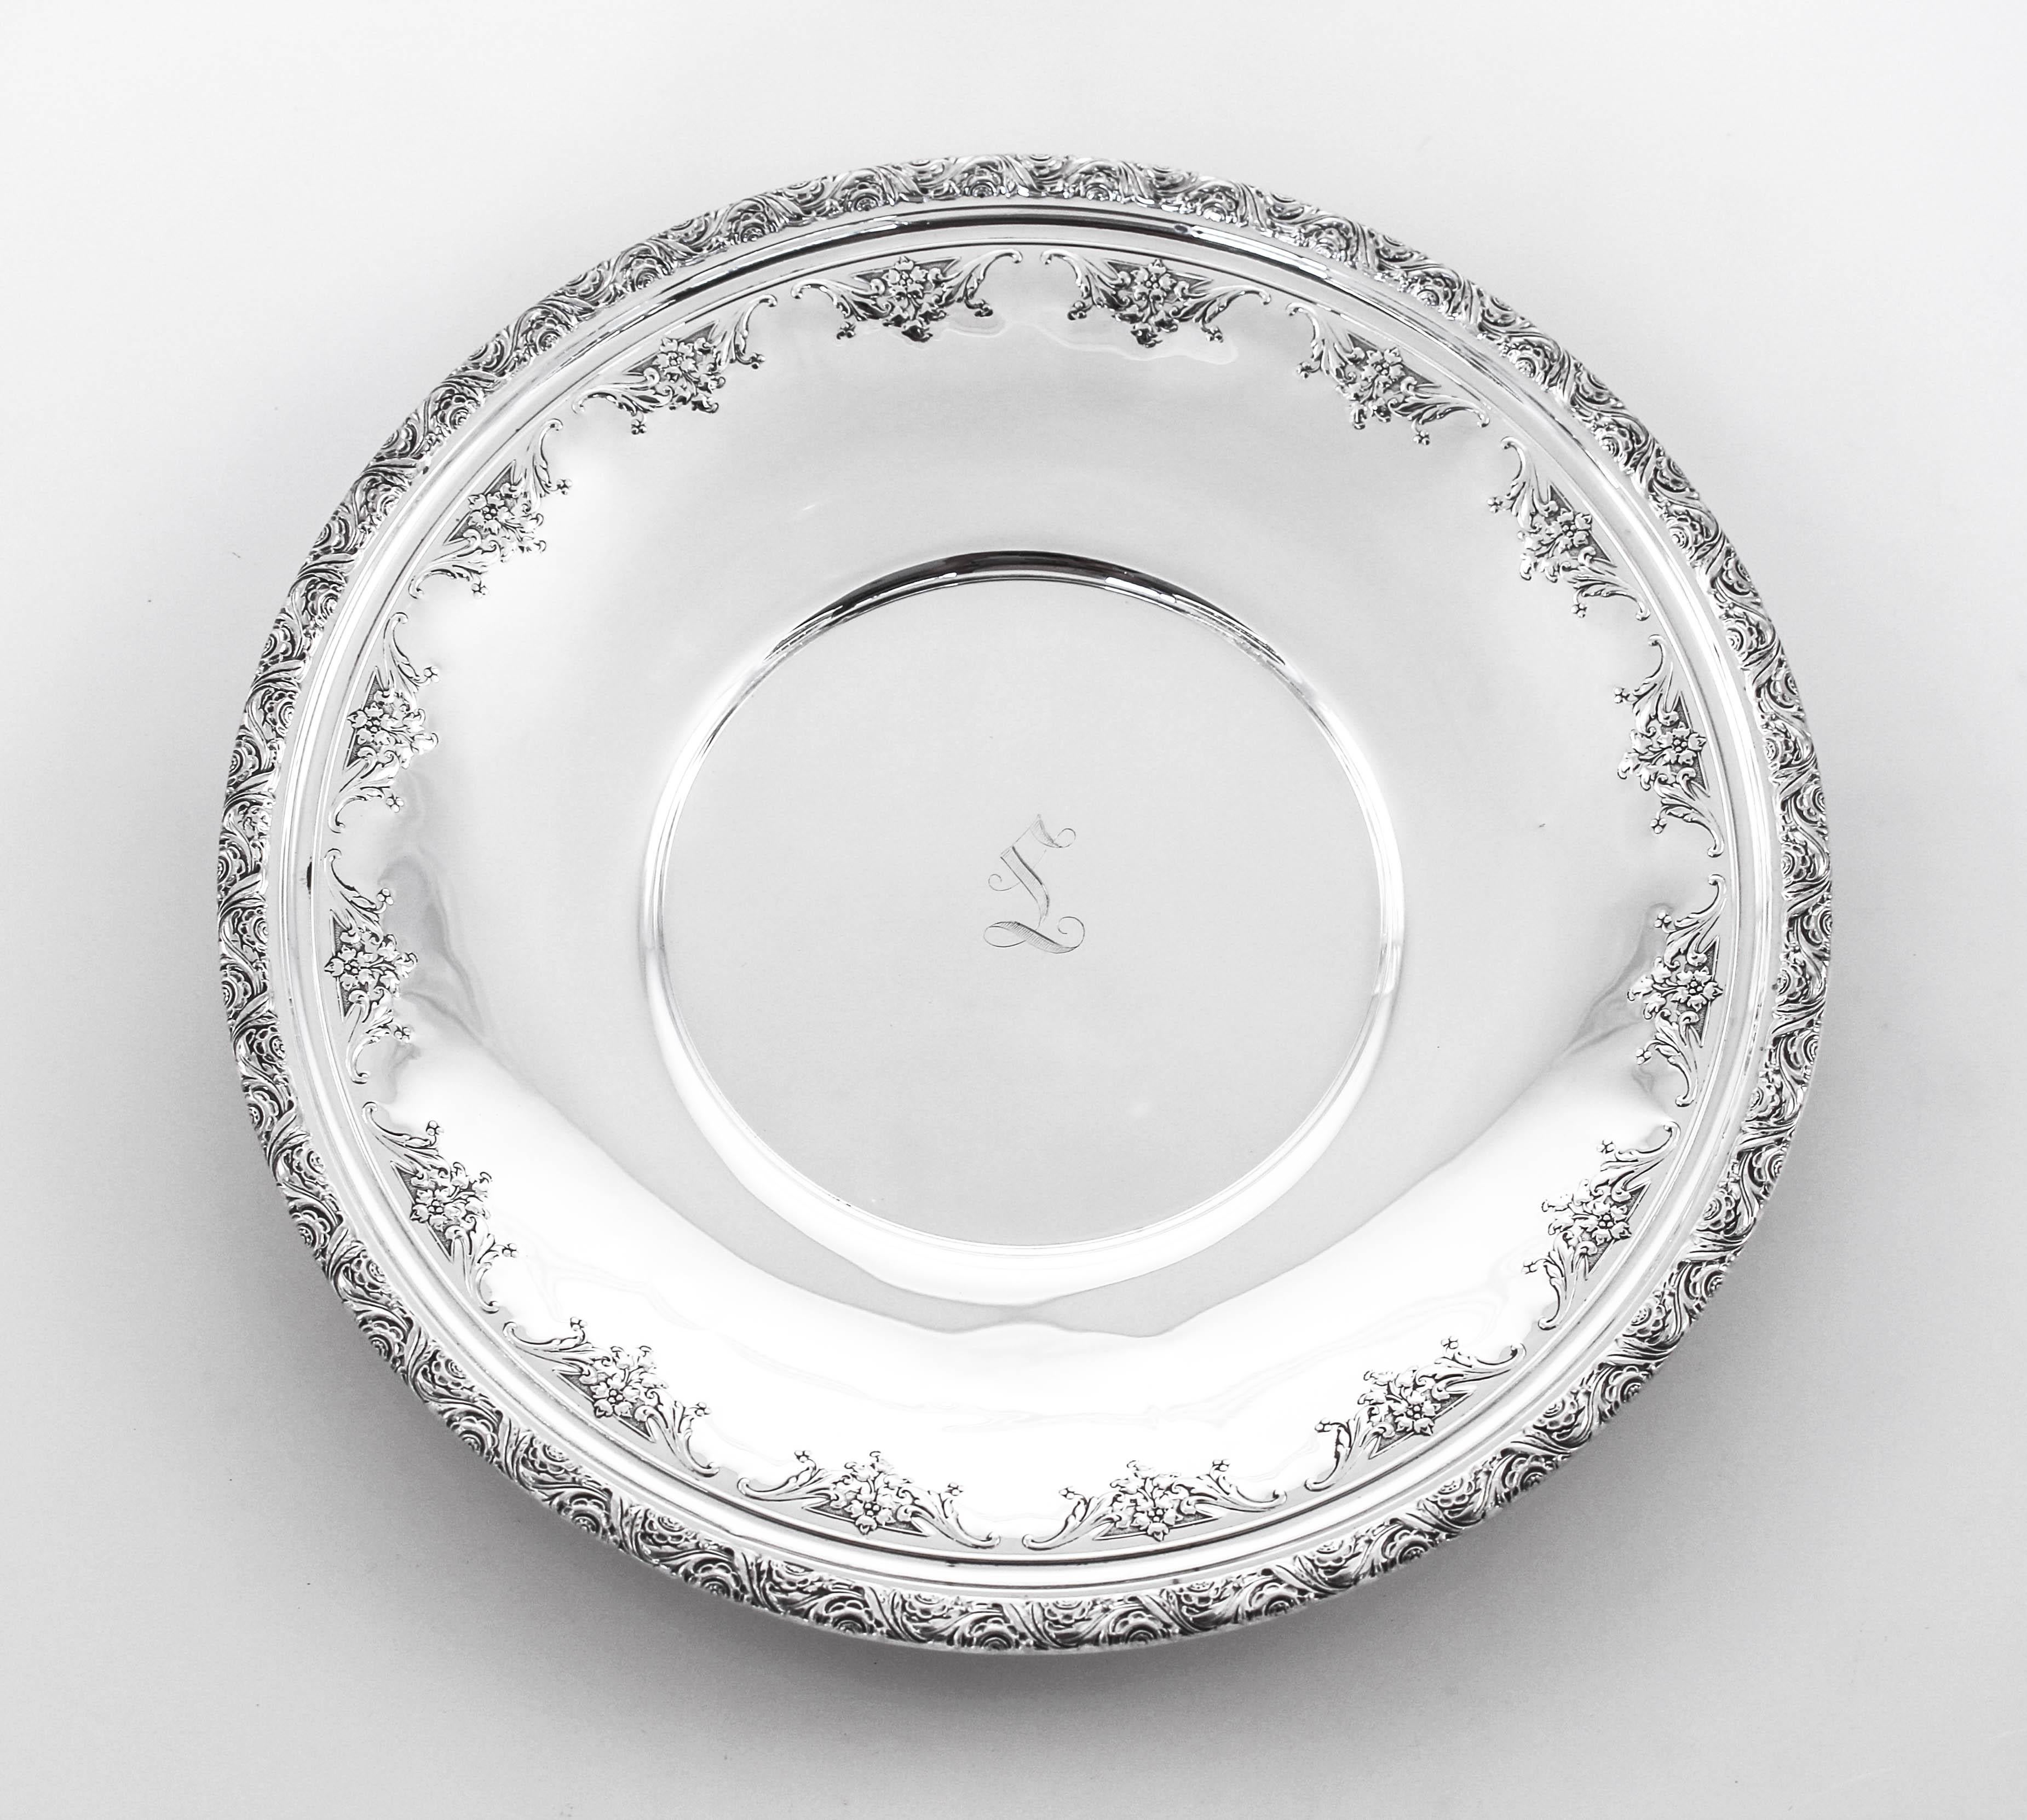 This sterling silver dish is so feminine and bridal-like. Clusters of flowers circle the entire inner rim. Along the outside perimeter a decorative motif can be found. In the center there is a script hand engraved L. A nice size for snacks or